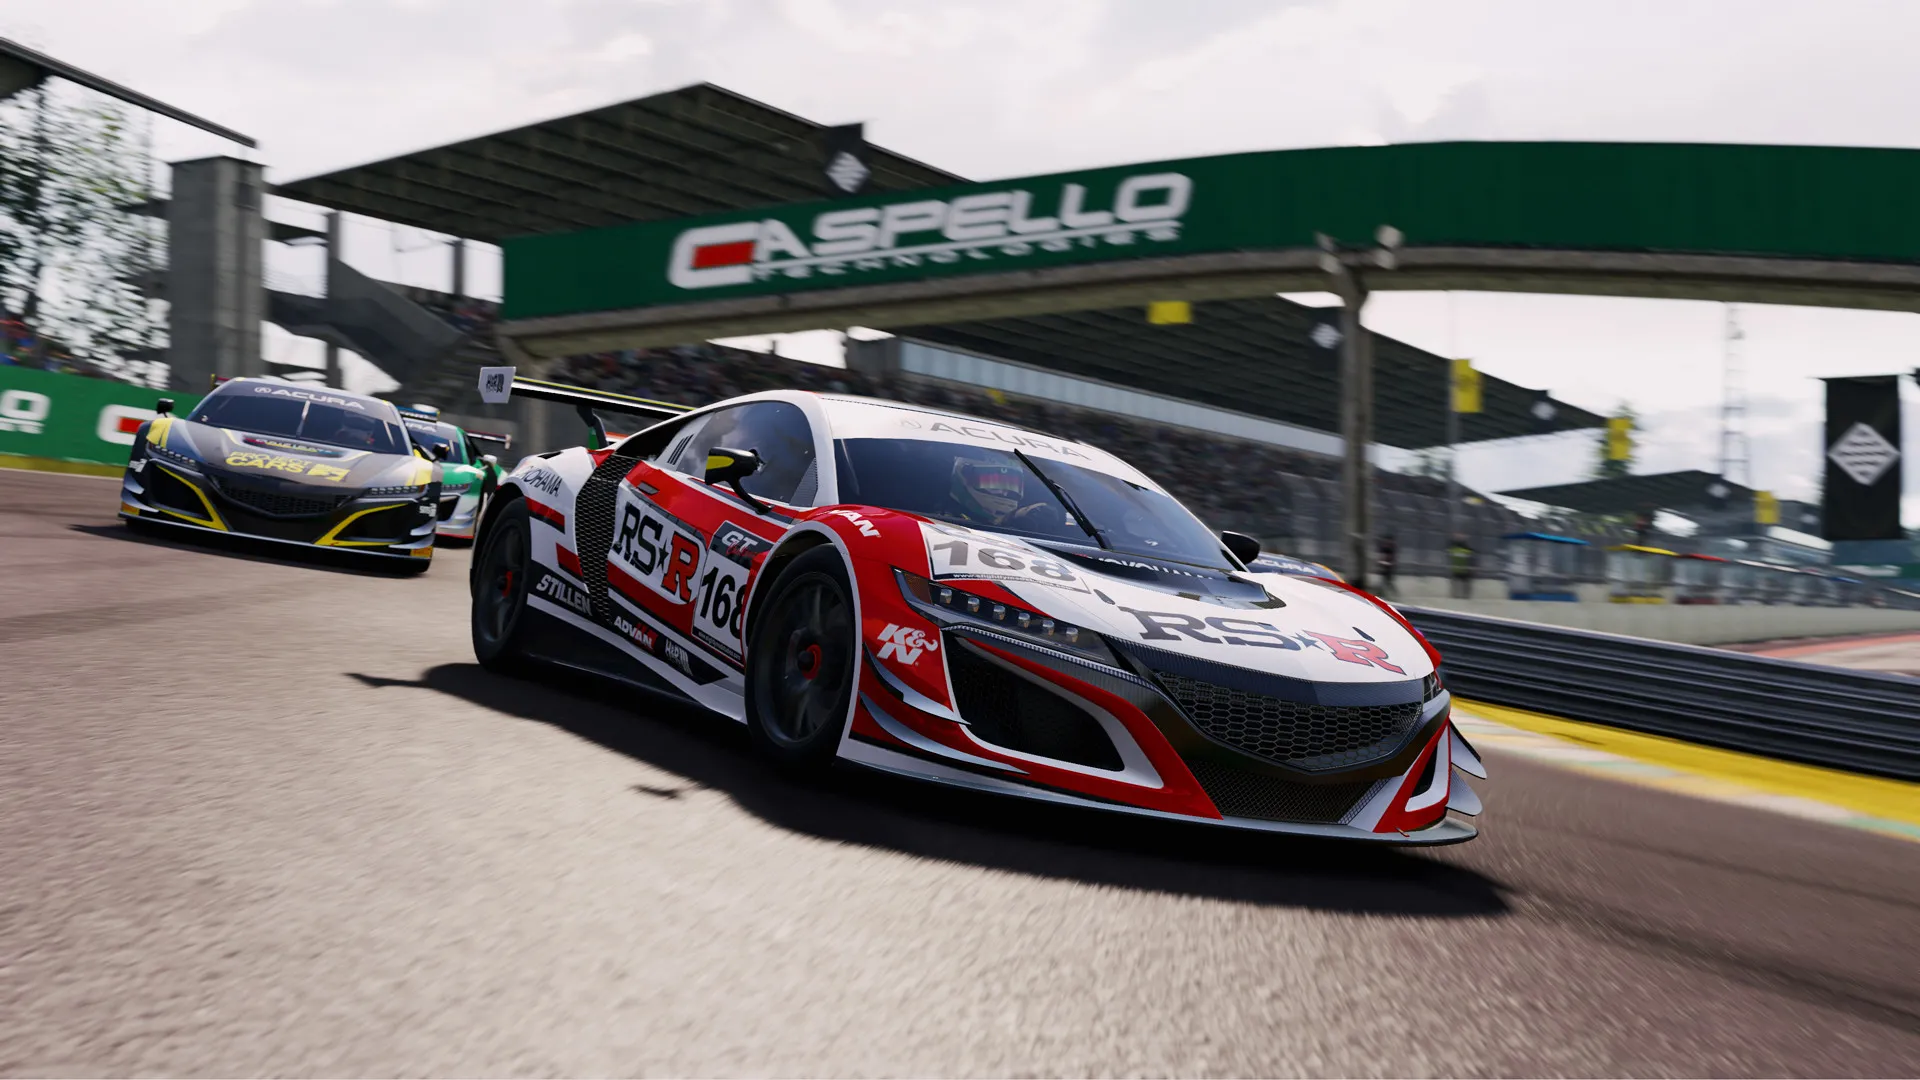 Project Cars 3 PC requirements minimum recommended specs